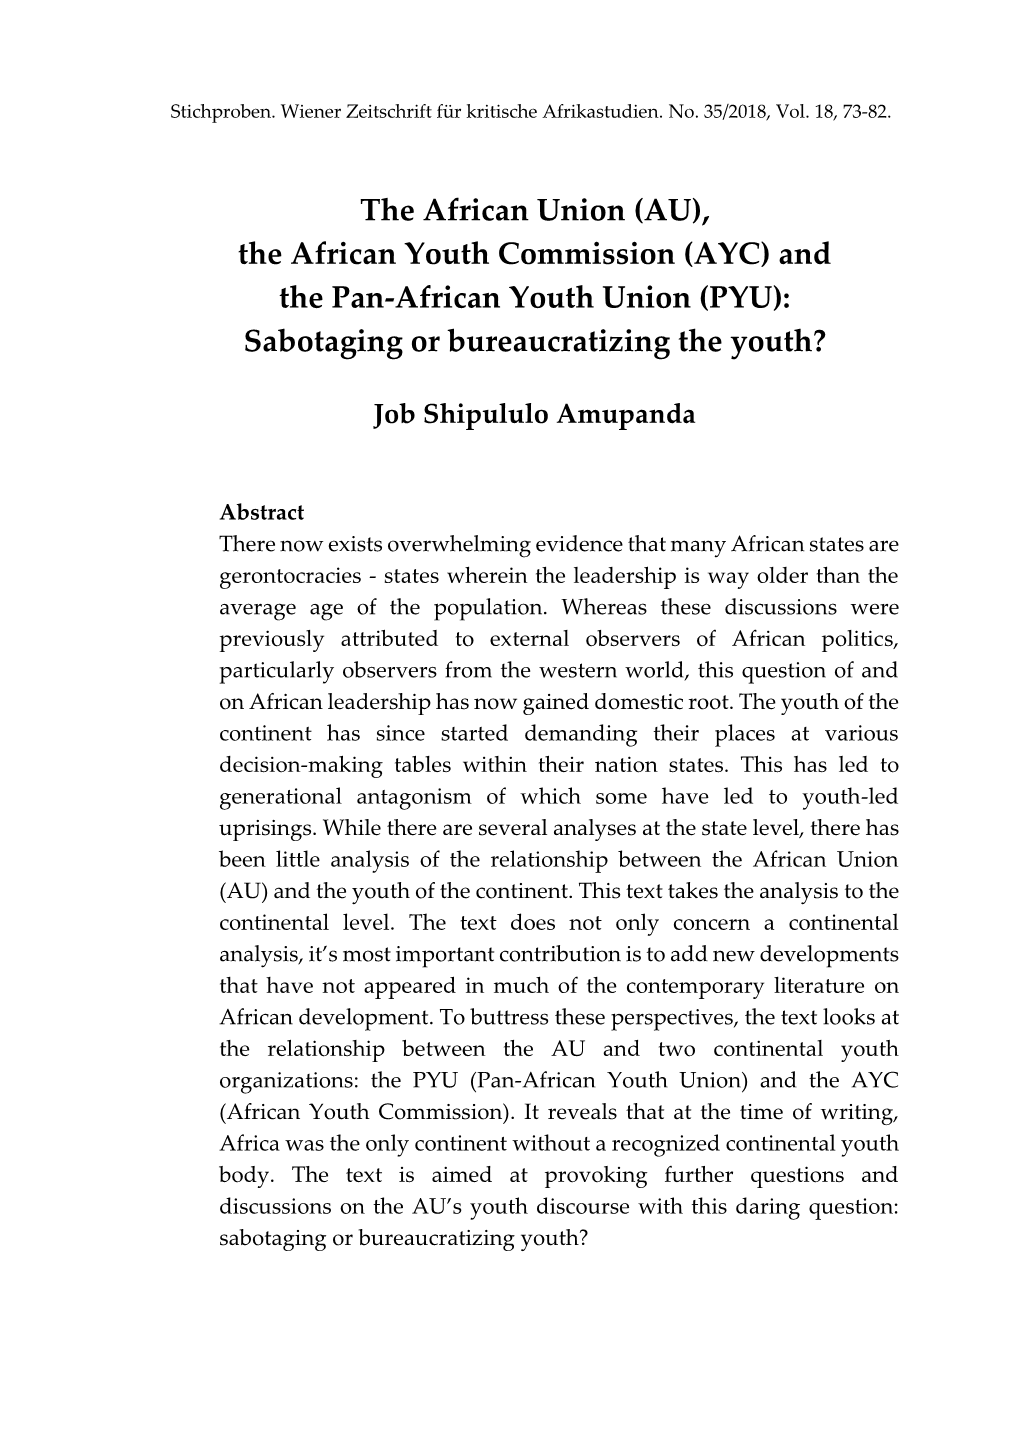 (AYC) and the Pan-African Youth Union (PYU): Sabotaging Or Bureaucratizing the Youth?